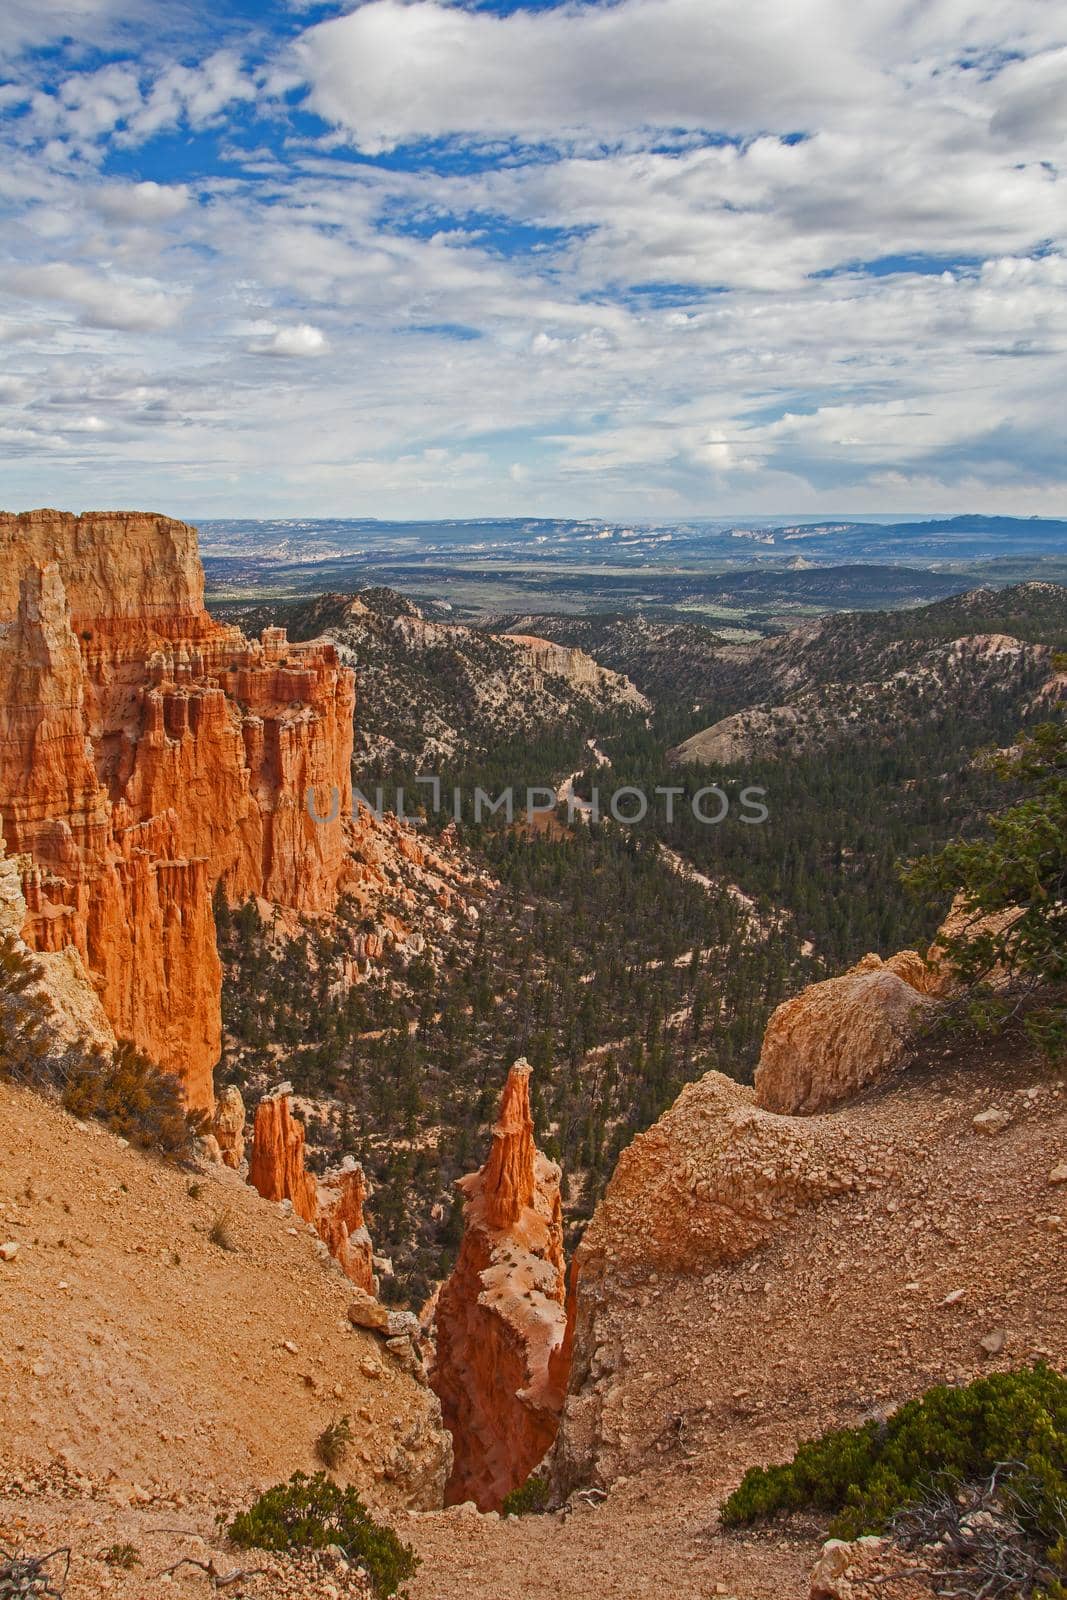 Paria View Bryce Canyon 2538 by kobus_peche